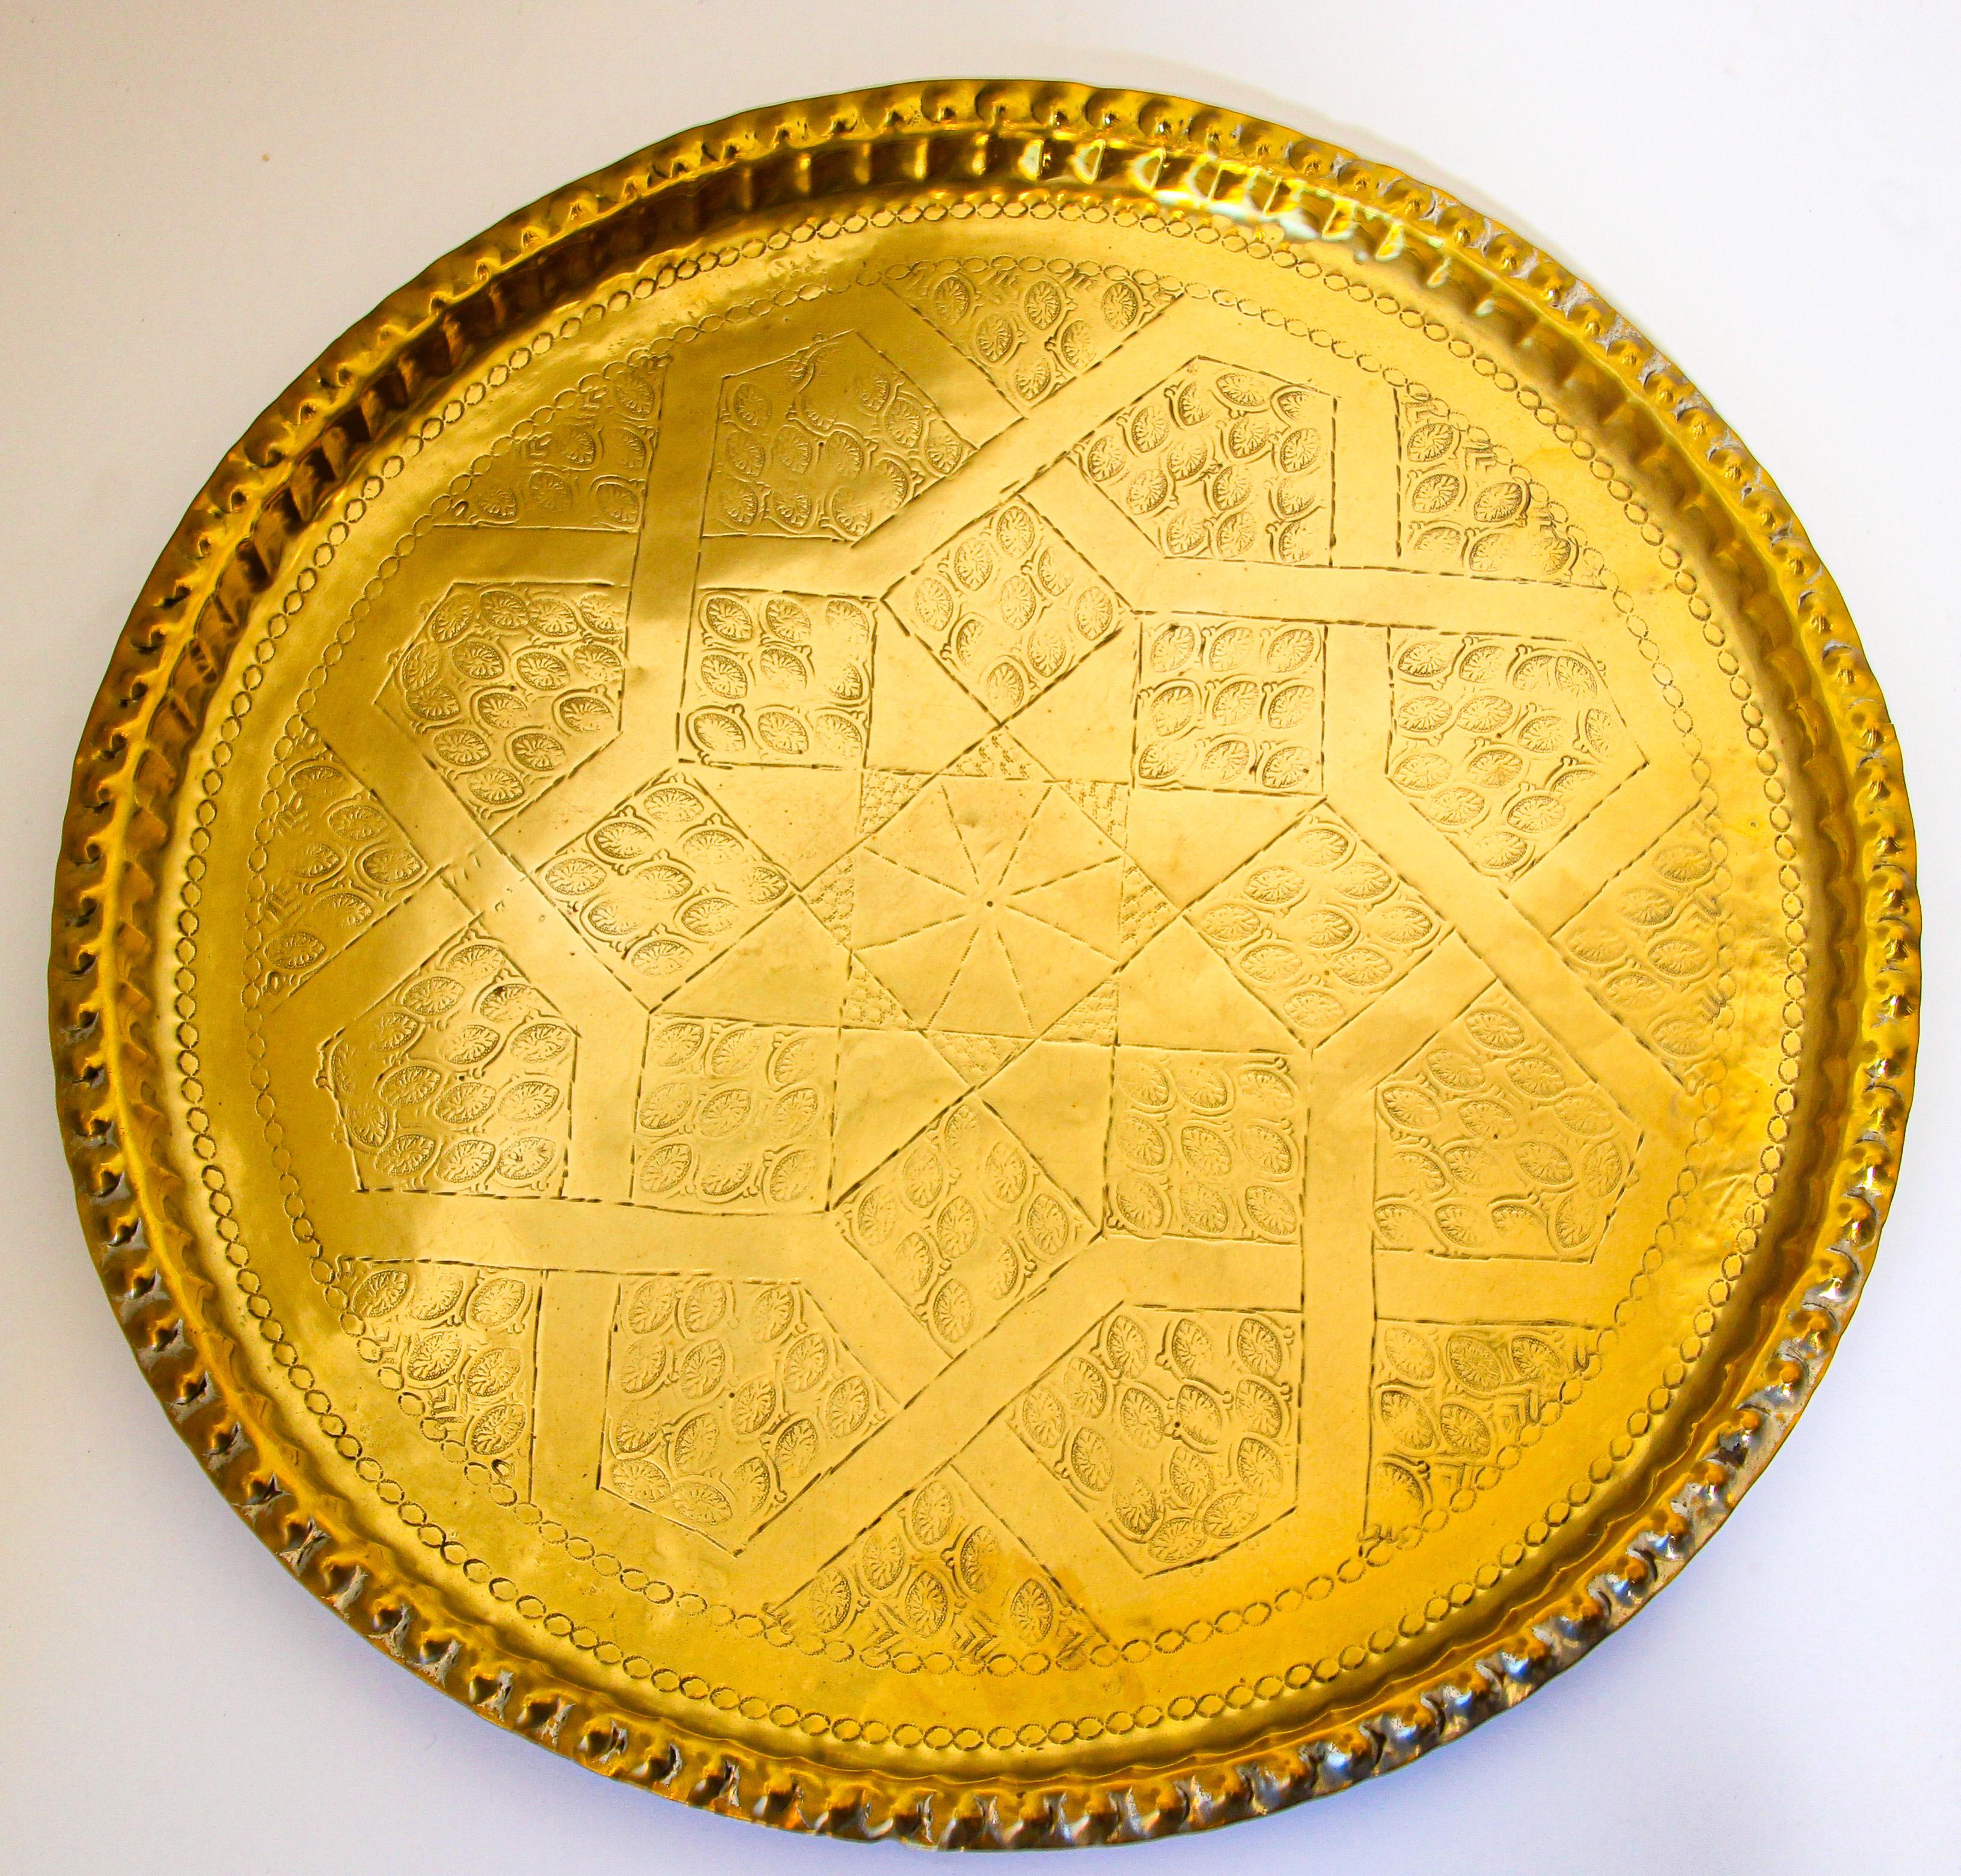 Vintage Moroccan Moorish hand-hammered brass tray, intricate artwork, Metalwork brass repousse Moorish geometric designs with the star of Salomon in the center.
Handcrafted decorative polished brass tray.
Fabulous hand-etched wall hanging